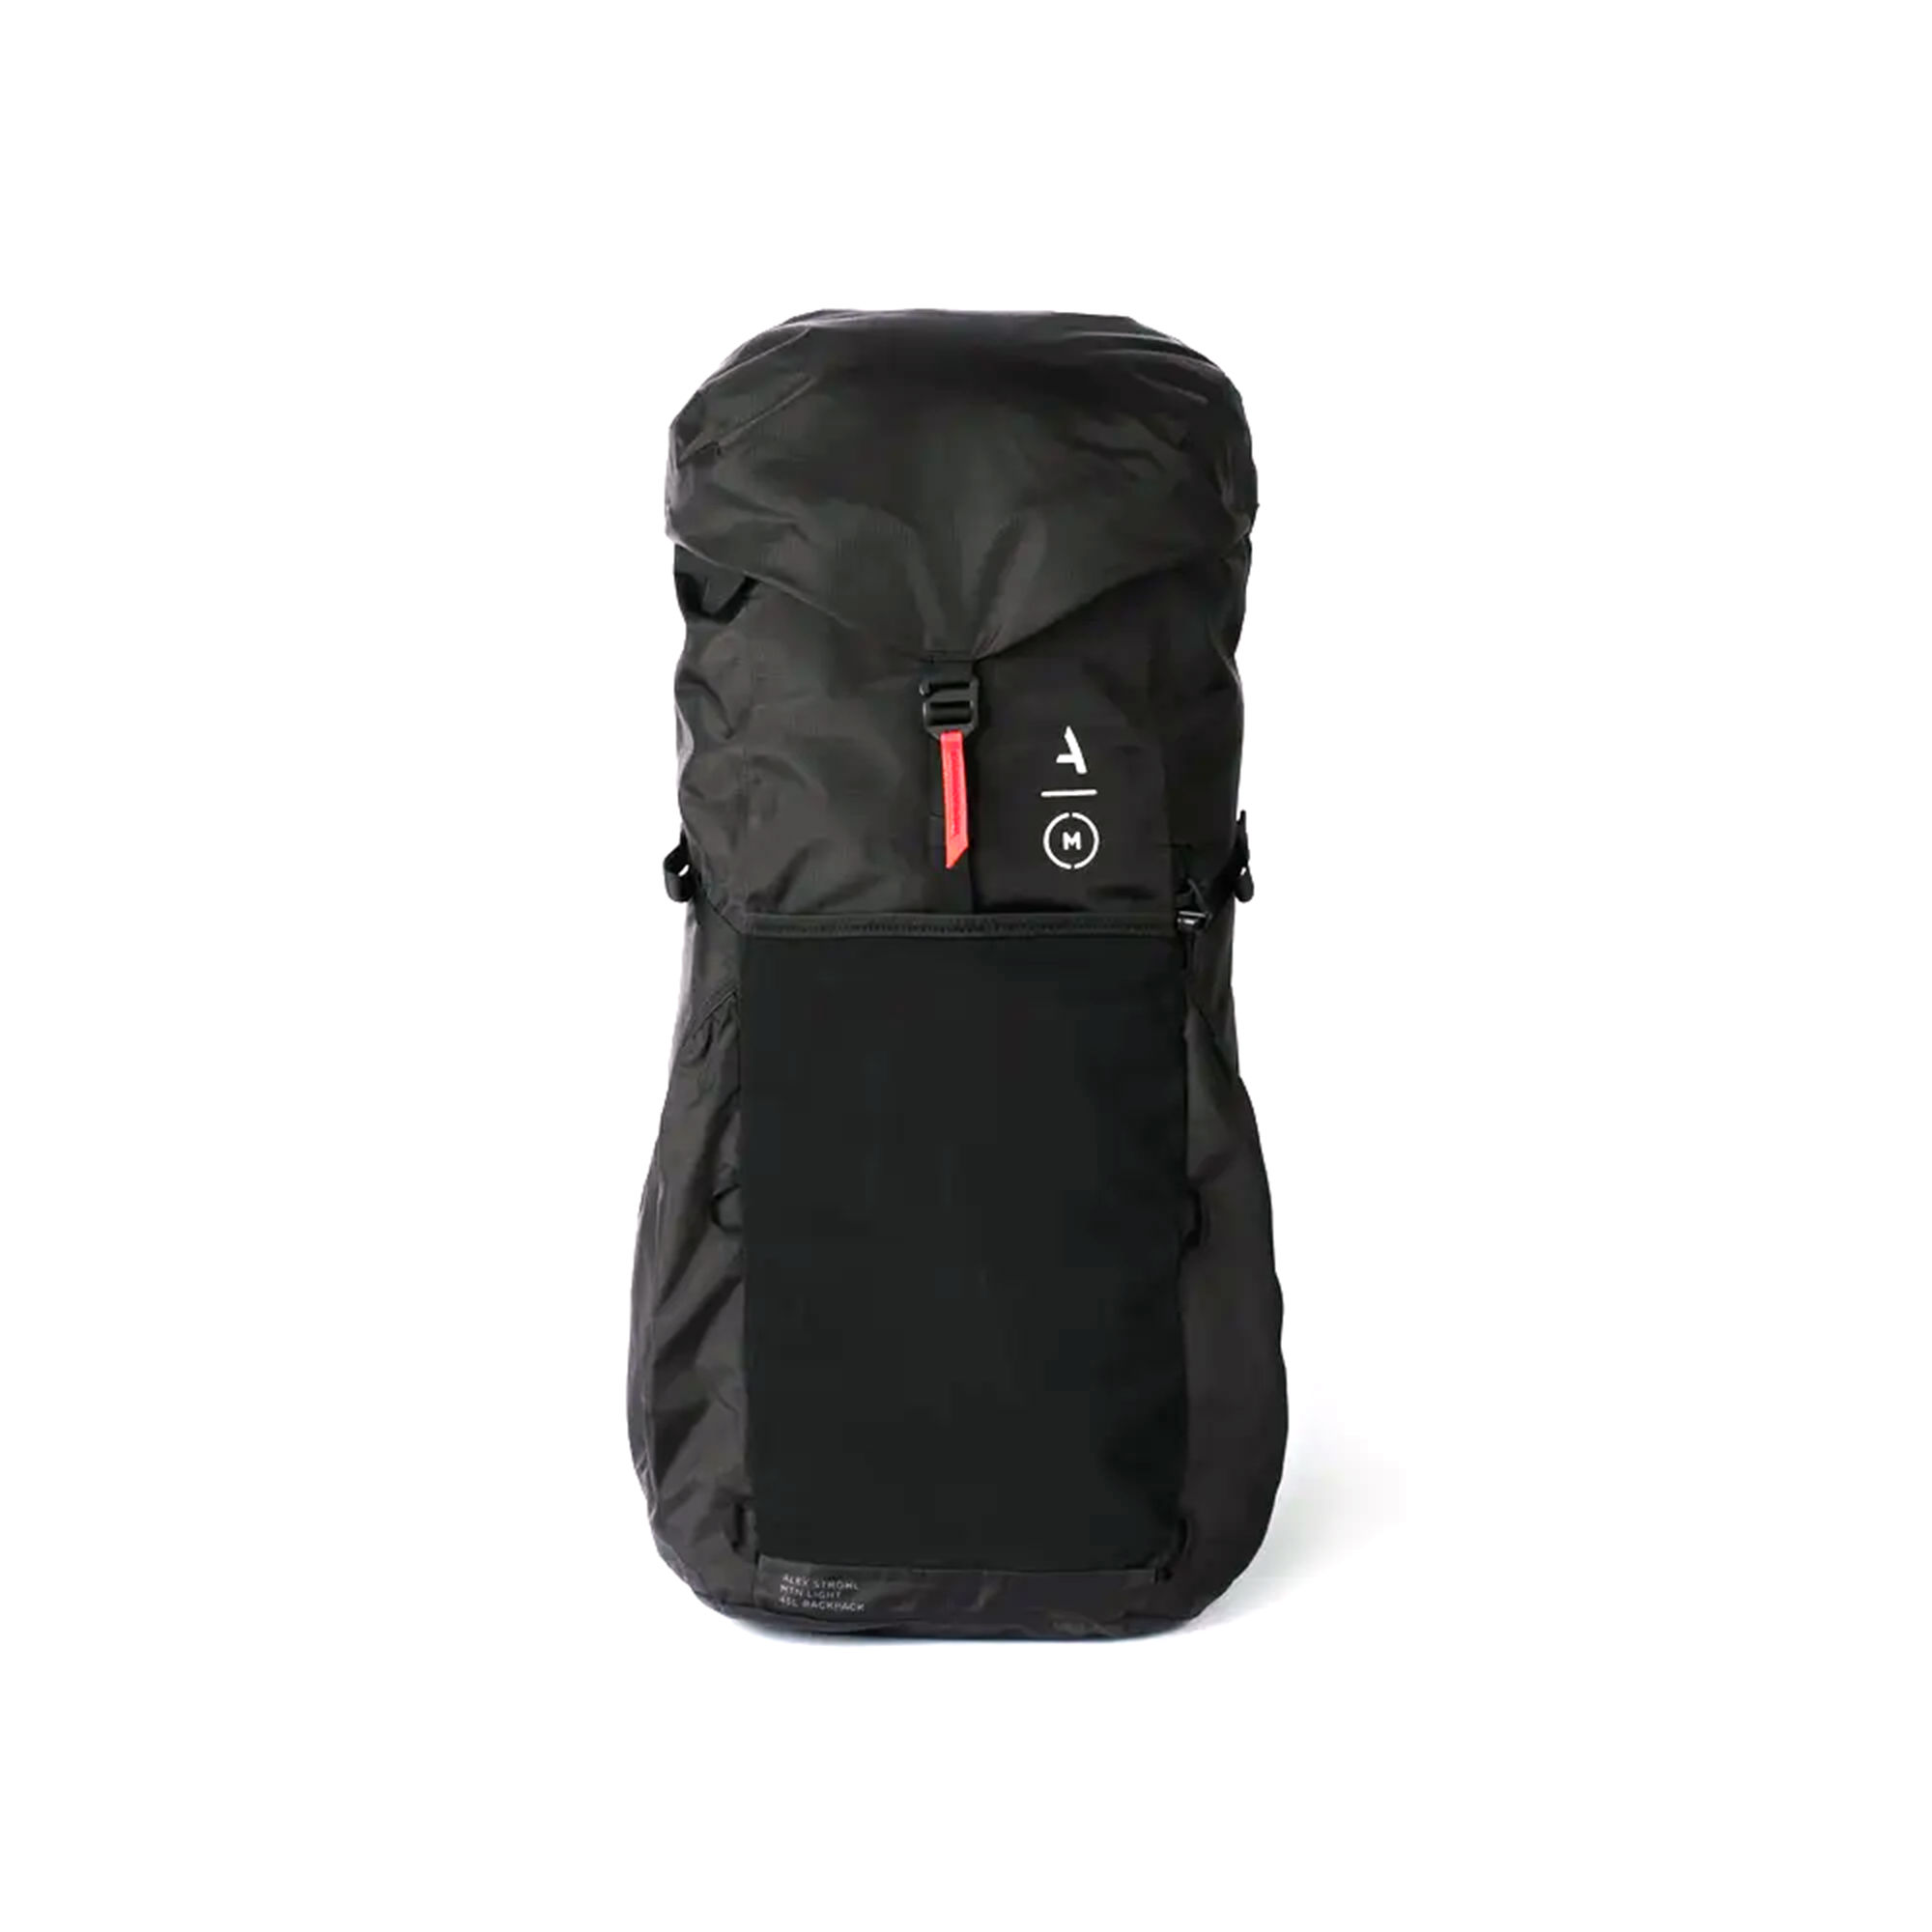 Moment Strohl Mountain Light 45L Backpack